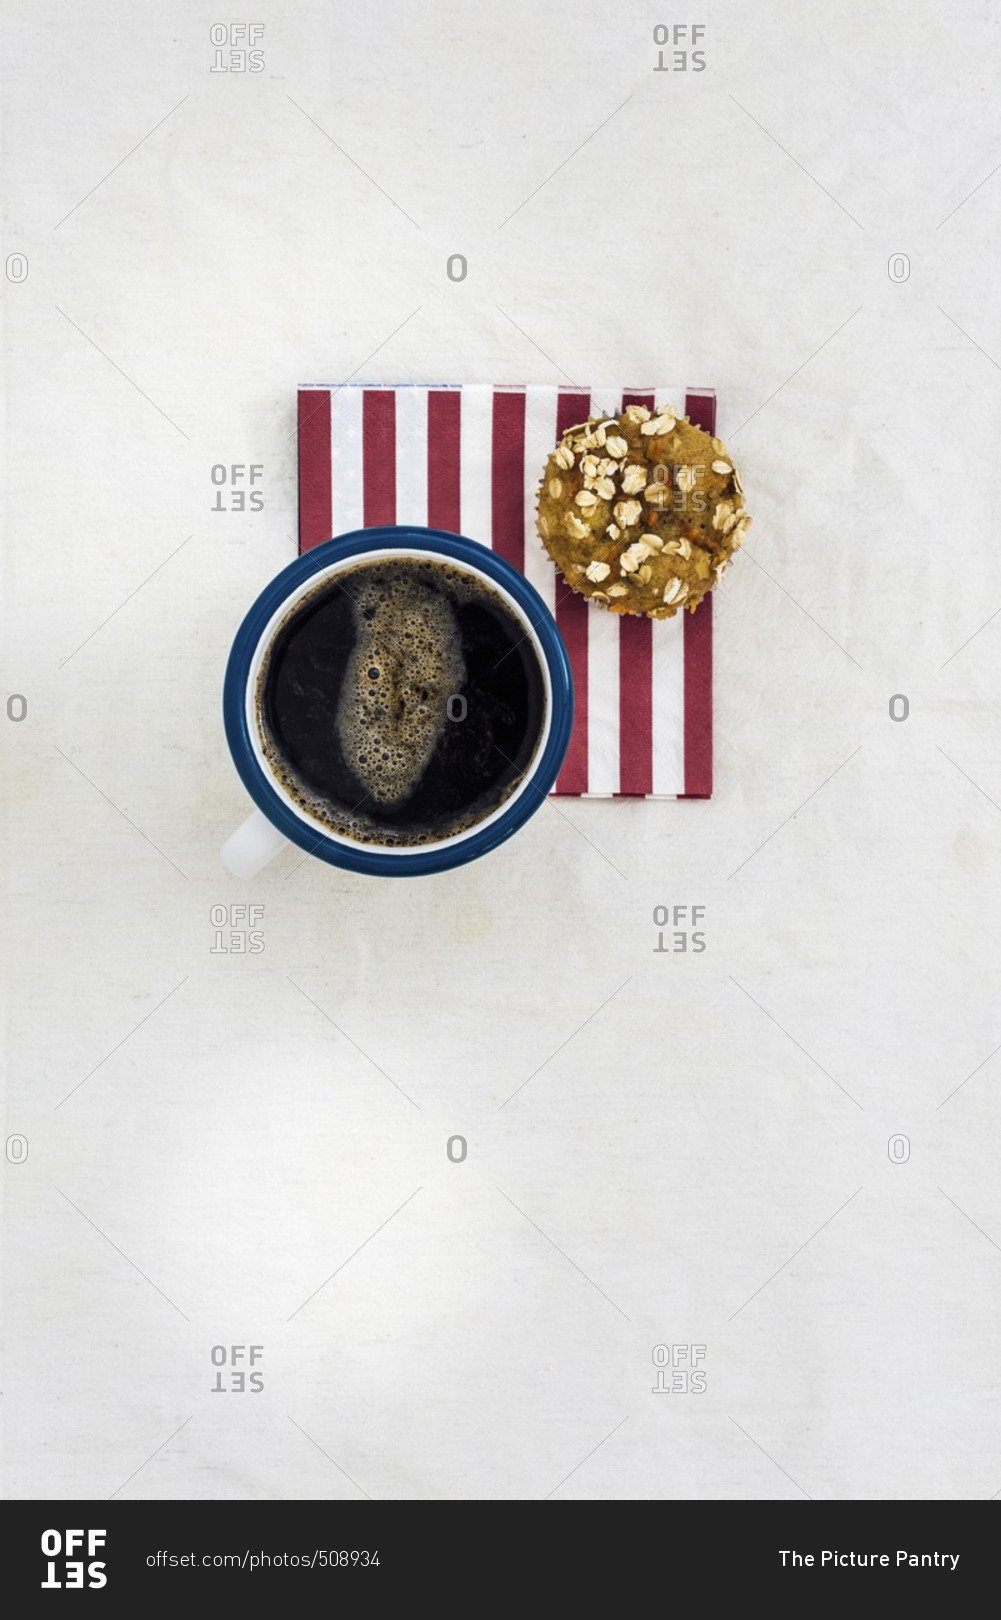 A mug of coffee and a carrot muffin on a red striped napkin photographed from top view.